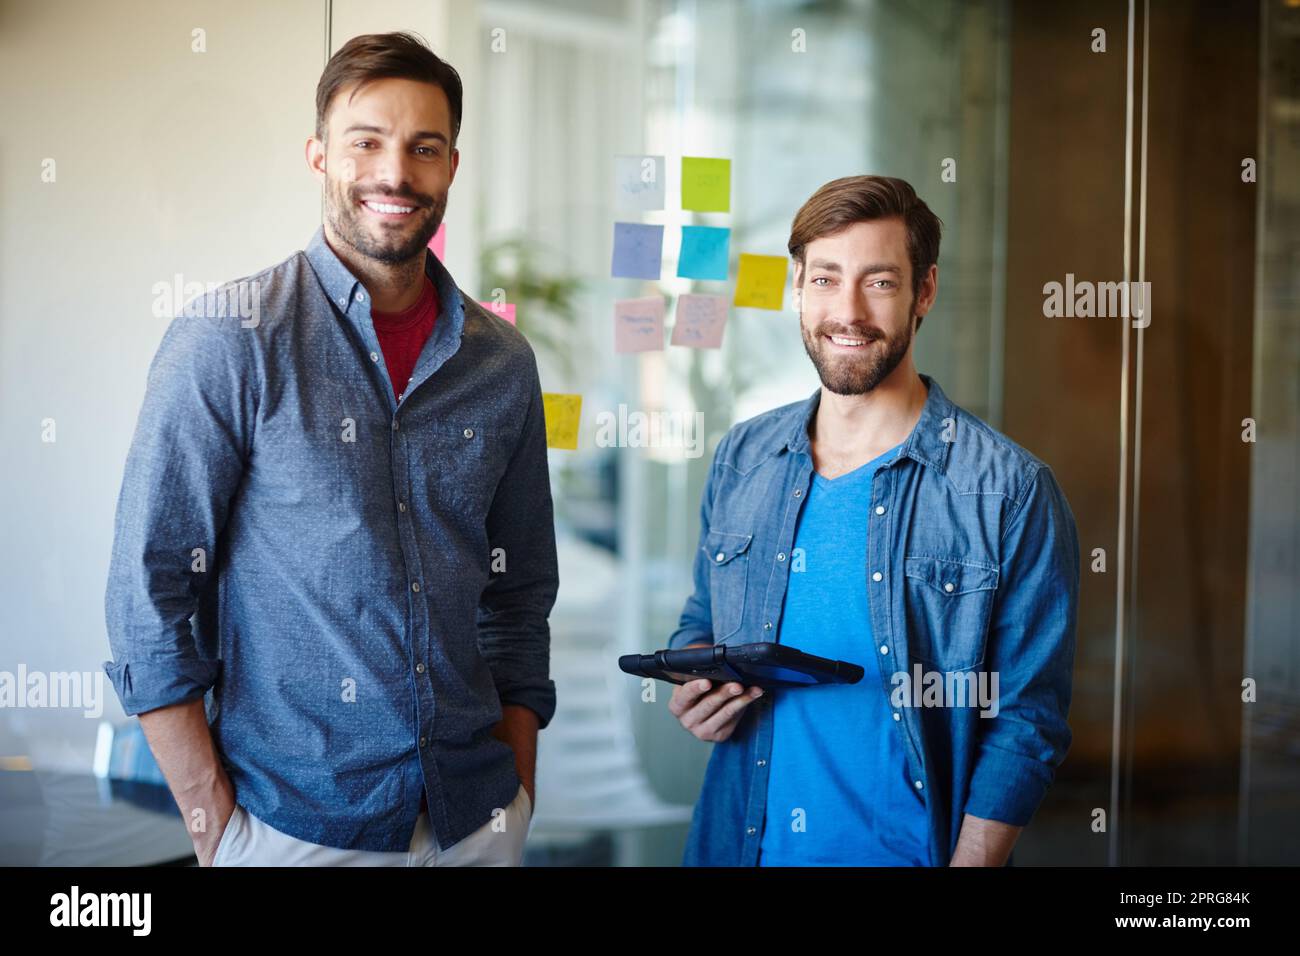 Were the face of success. Portrait of two young businessmen standing together in an office. Stock Photo